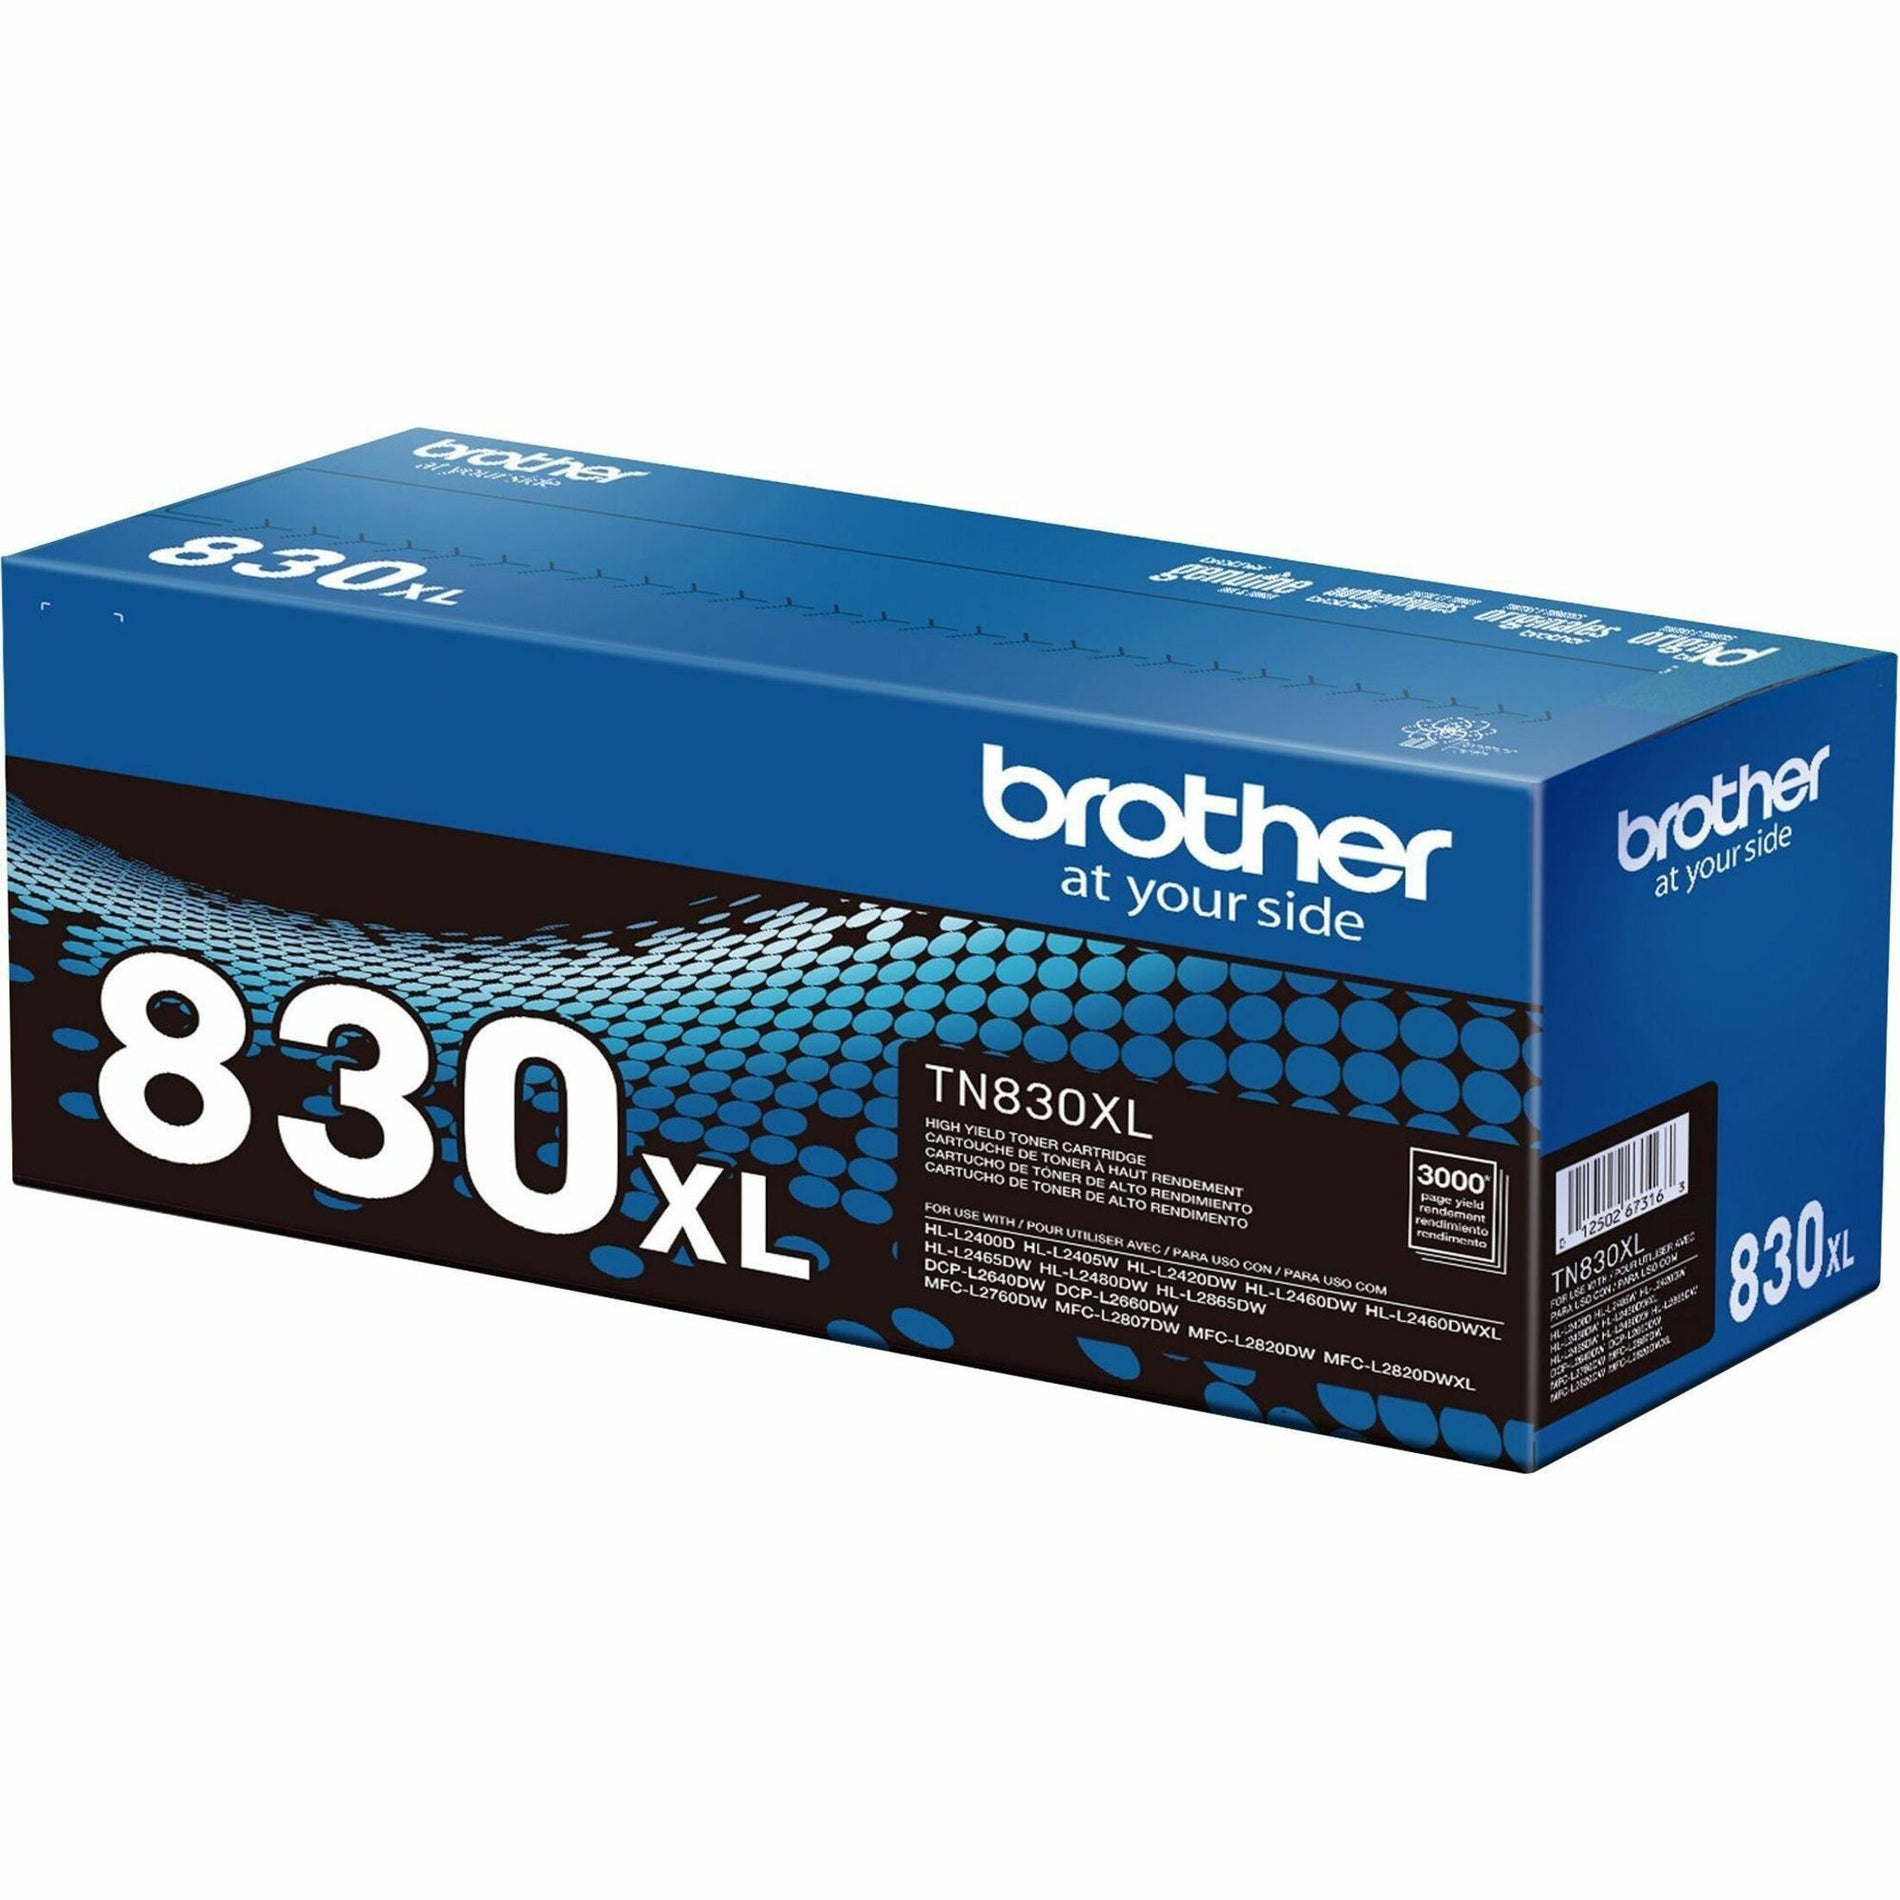 Brother TN830XL Genuine Toner Cartridge - Black, High Yield, 3000 Pages